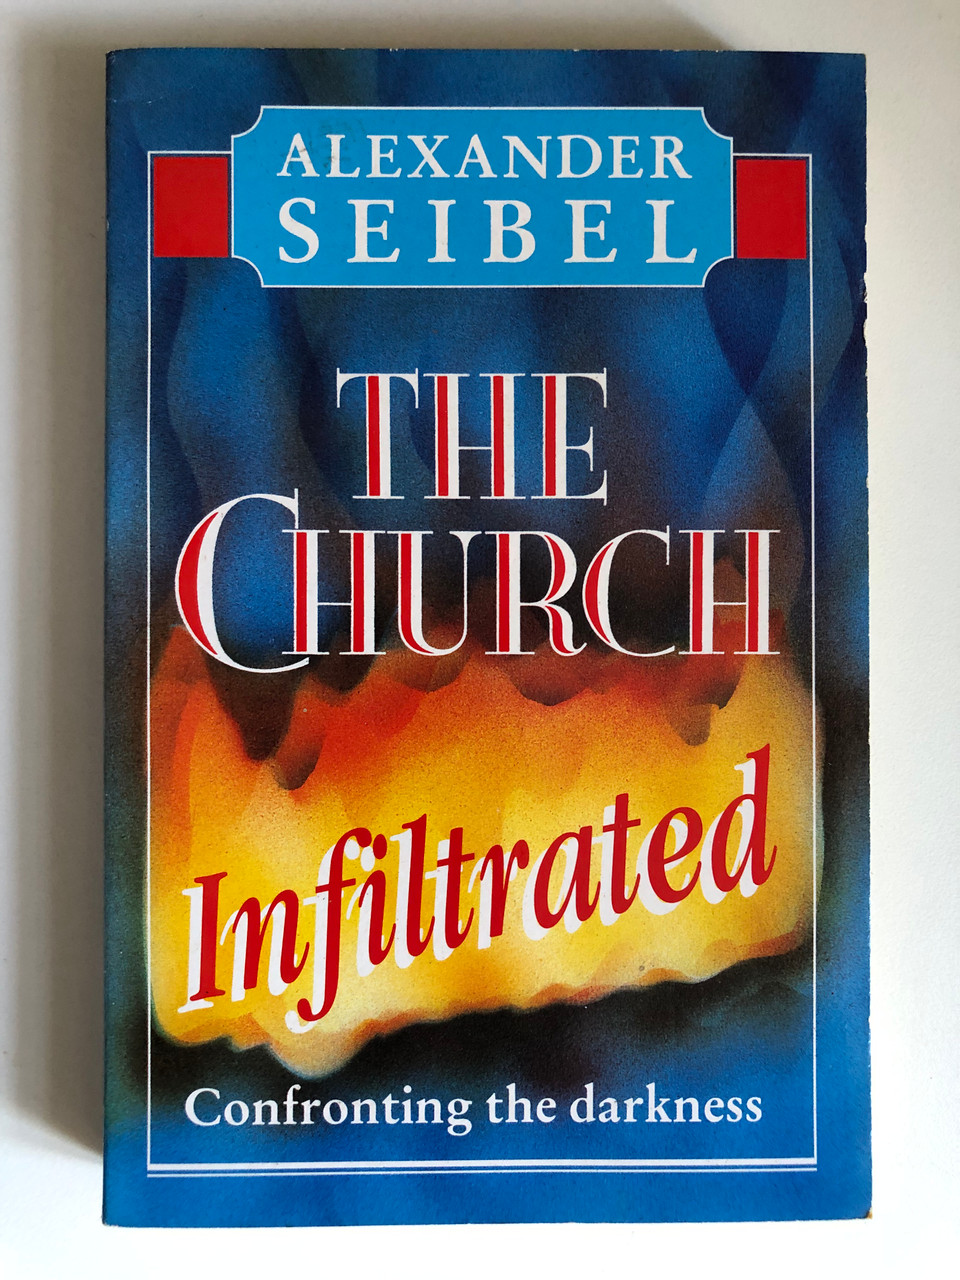 The_Church_Infiltrated_by_Alexander_Seibel_Confronting_the_Darkness_Publisher_Chapter_Two_London_England_2__10885.1691238817.1280.1280.JPG (960×1280)